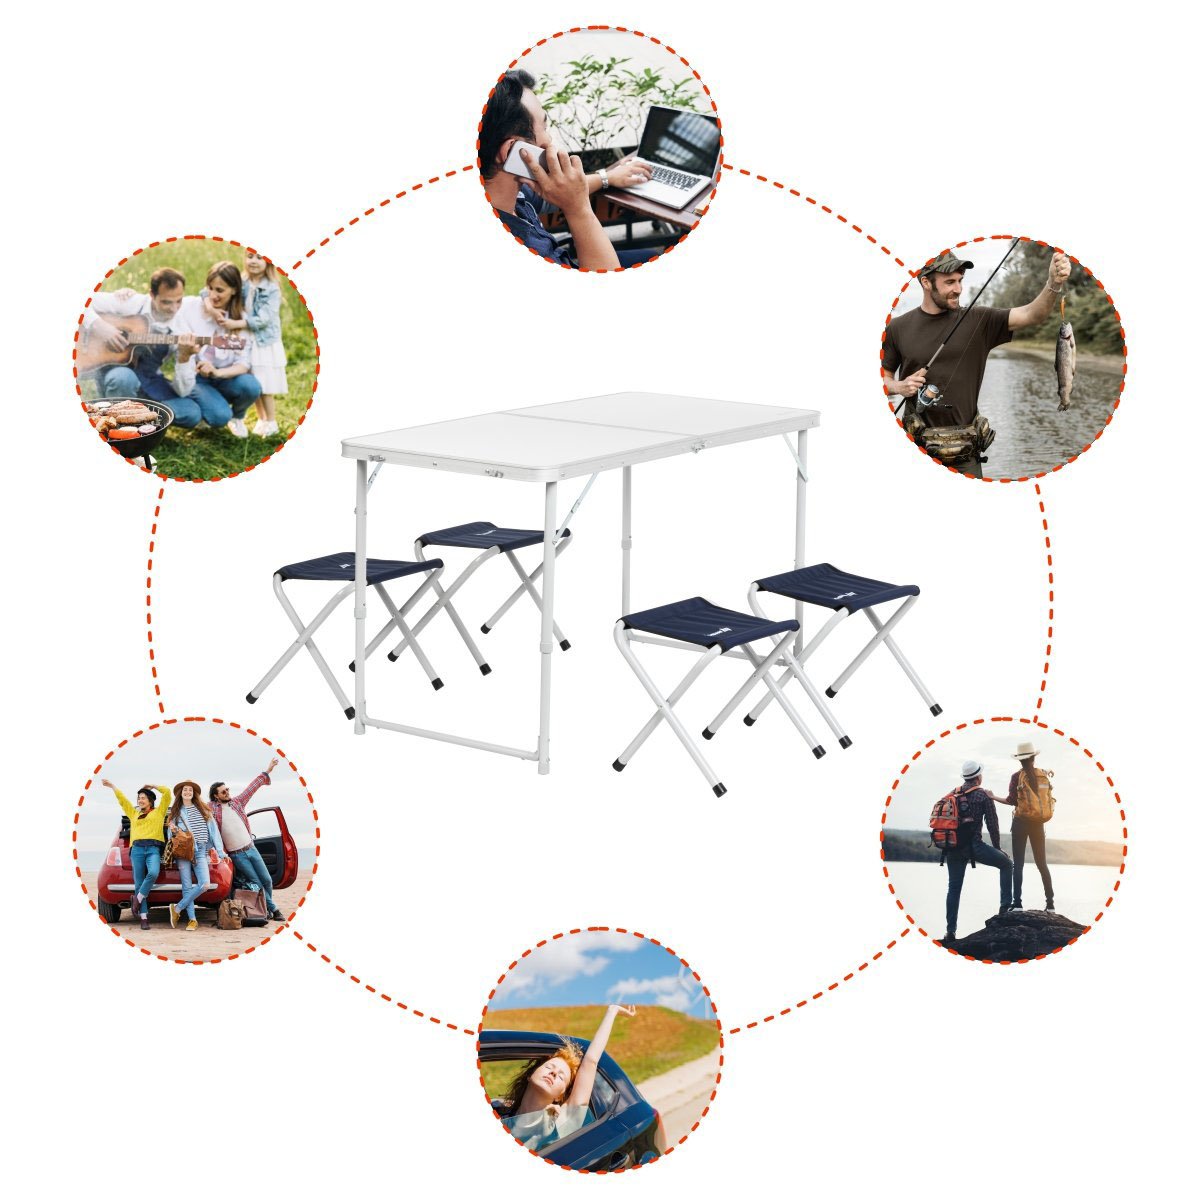 Outdoor Folding Furniture Set for Camping and Outdoor could be used in a plenty of activities